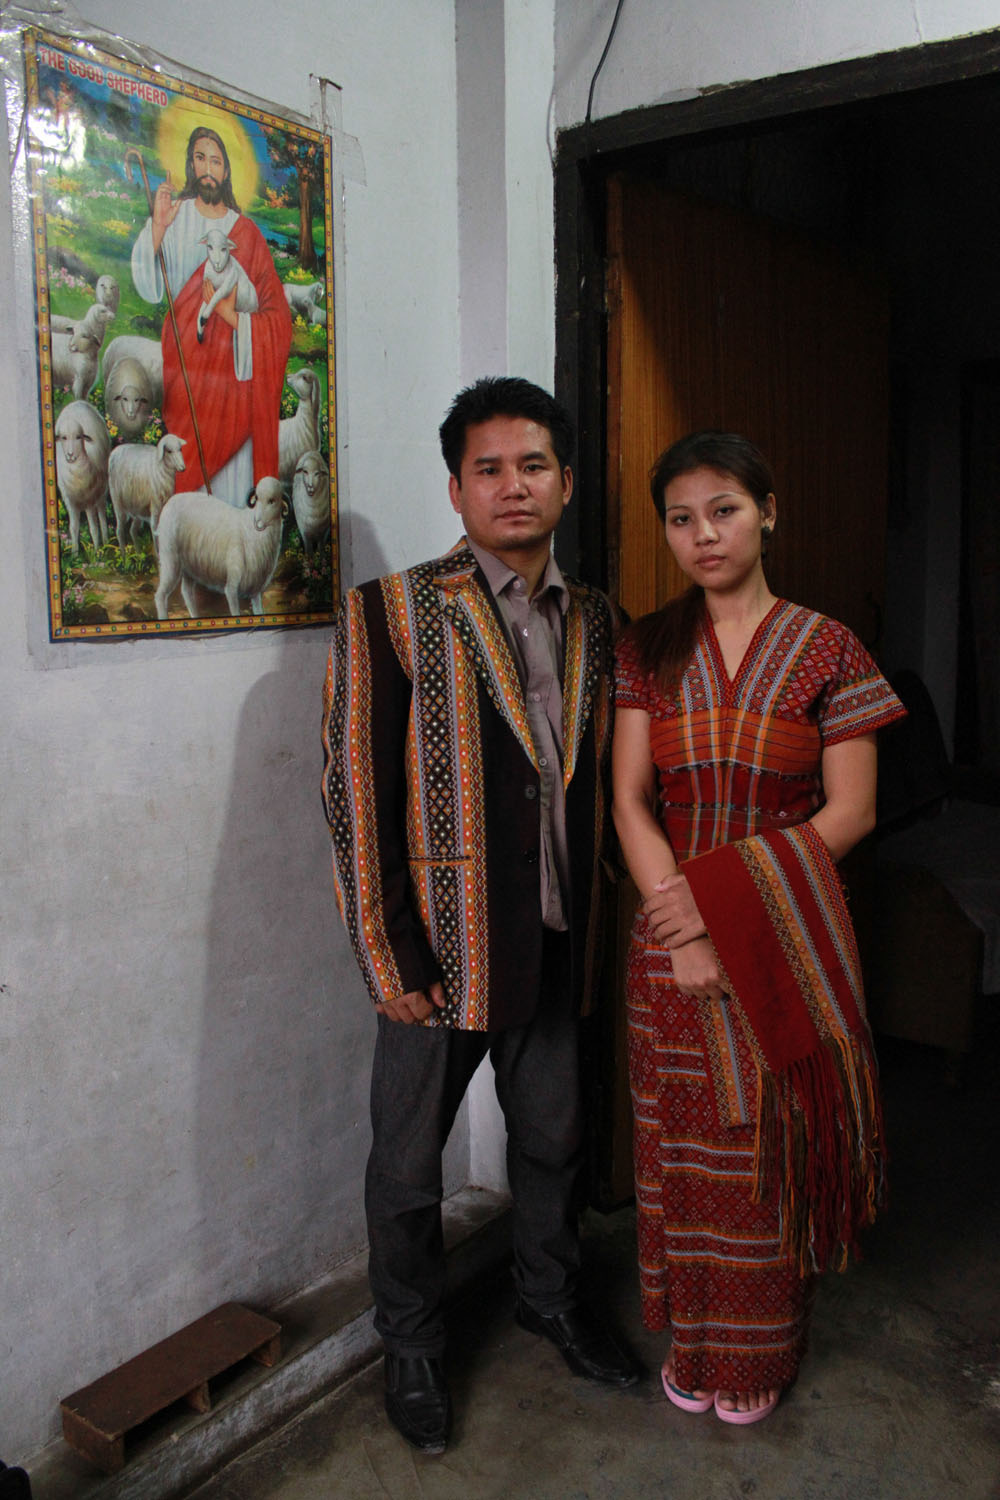 A men and women in traditional attire which will be exported.